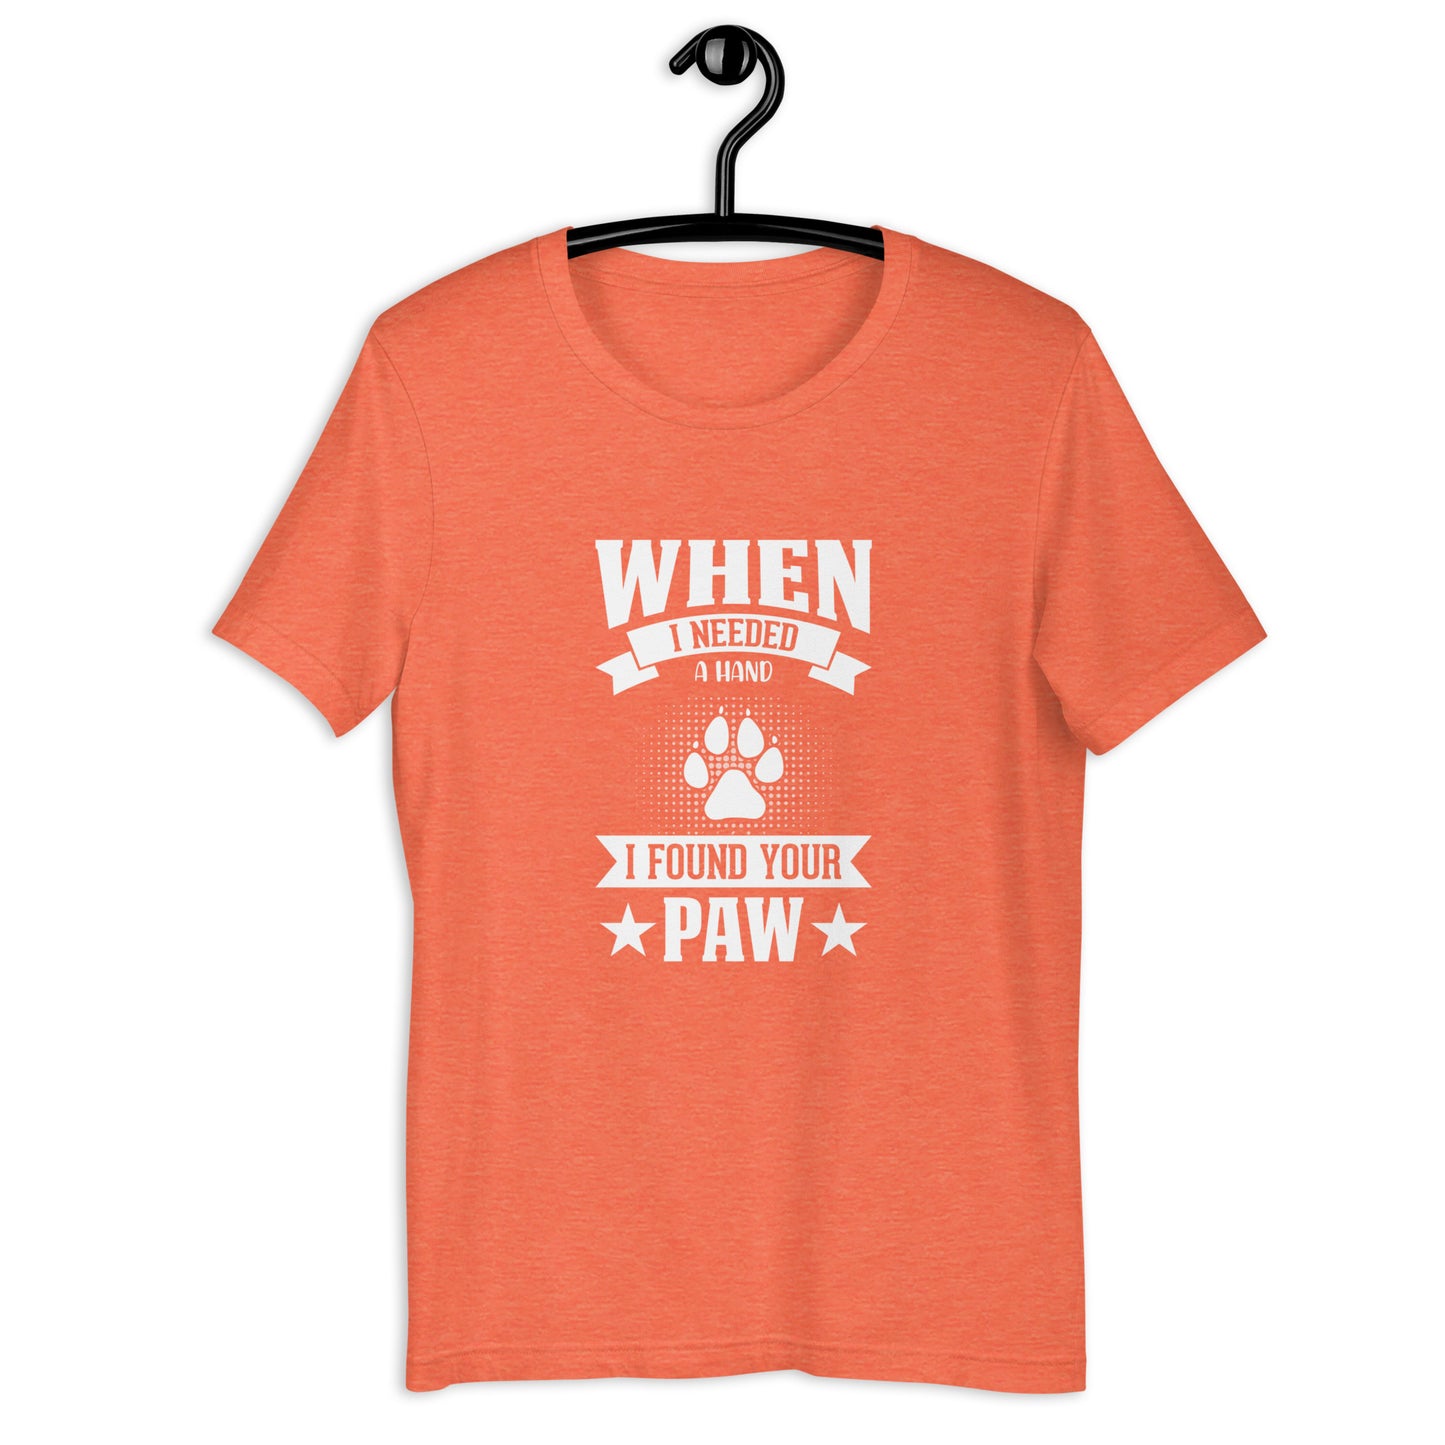 FOUND YOUR PAW - Unisex t-shirt